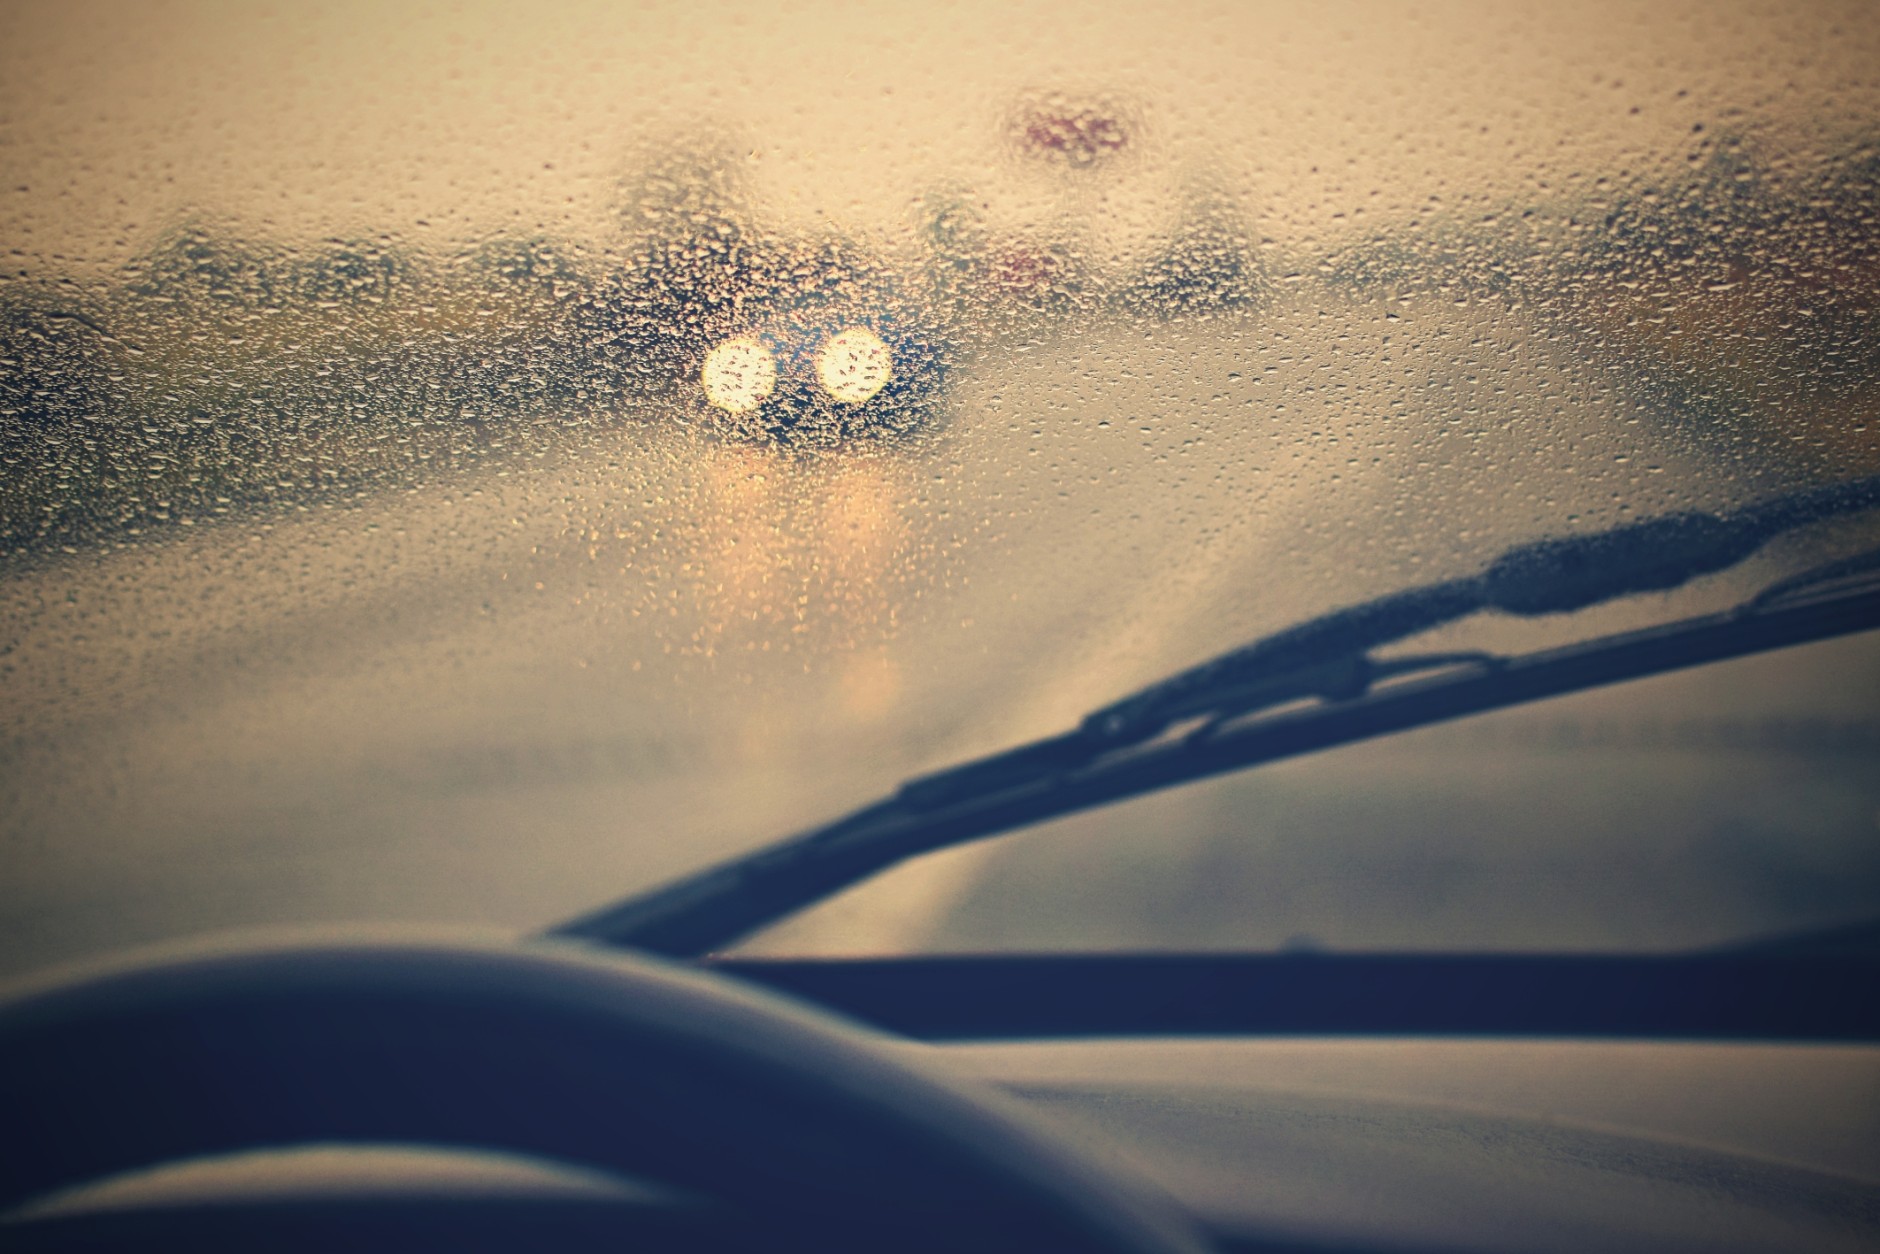 The best way to keep your windshield free of fog? Run the air conditioner. (Getty Images/iStockphoto/Montypeter)